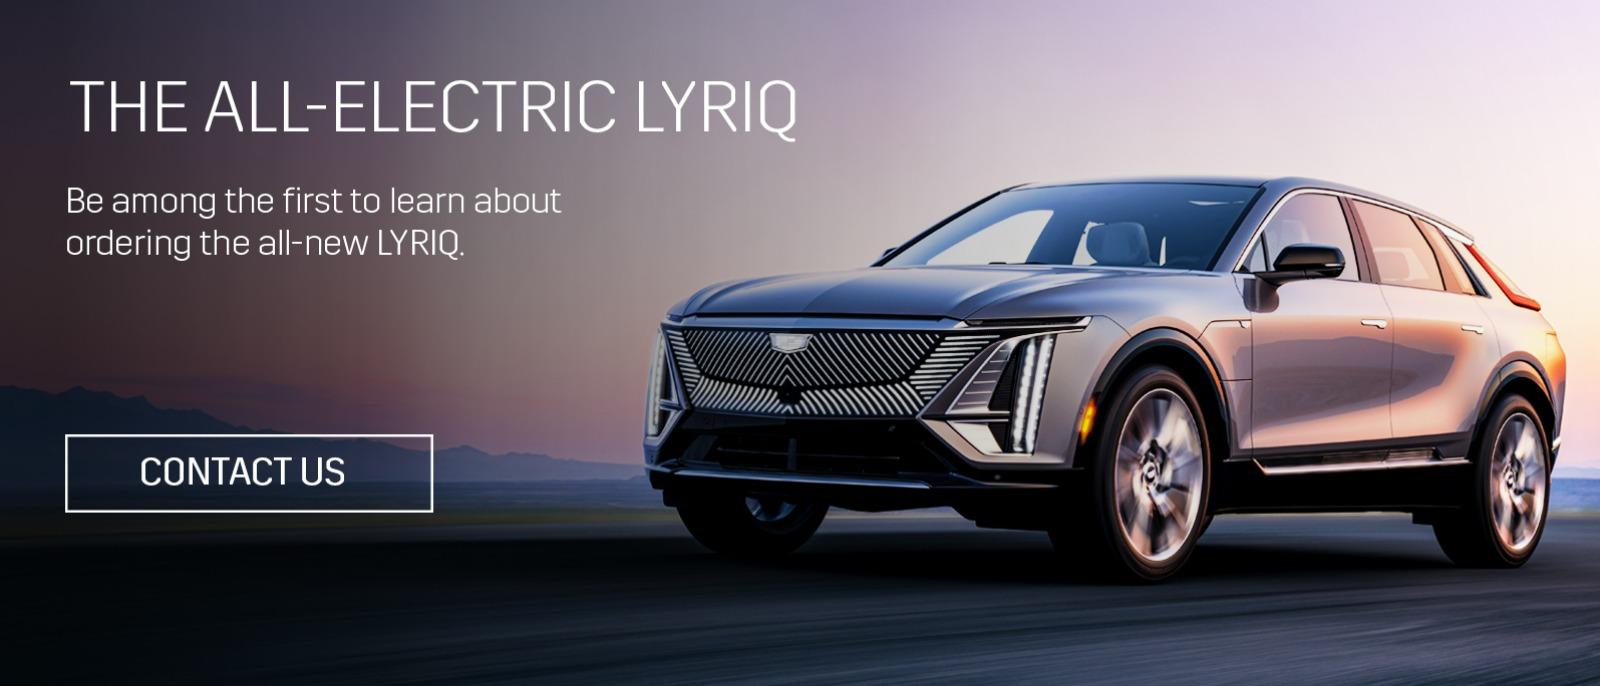 Find out more on the All-Electric LYRIQ